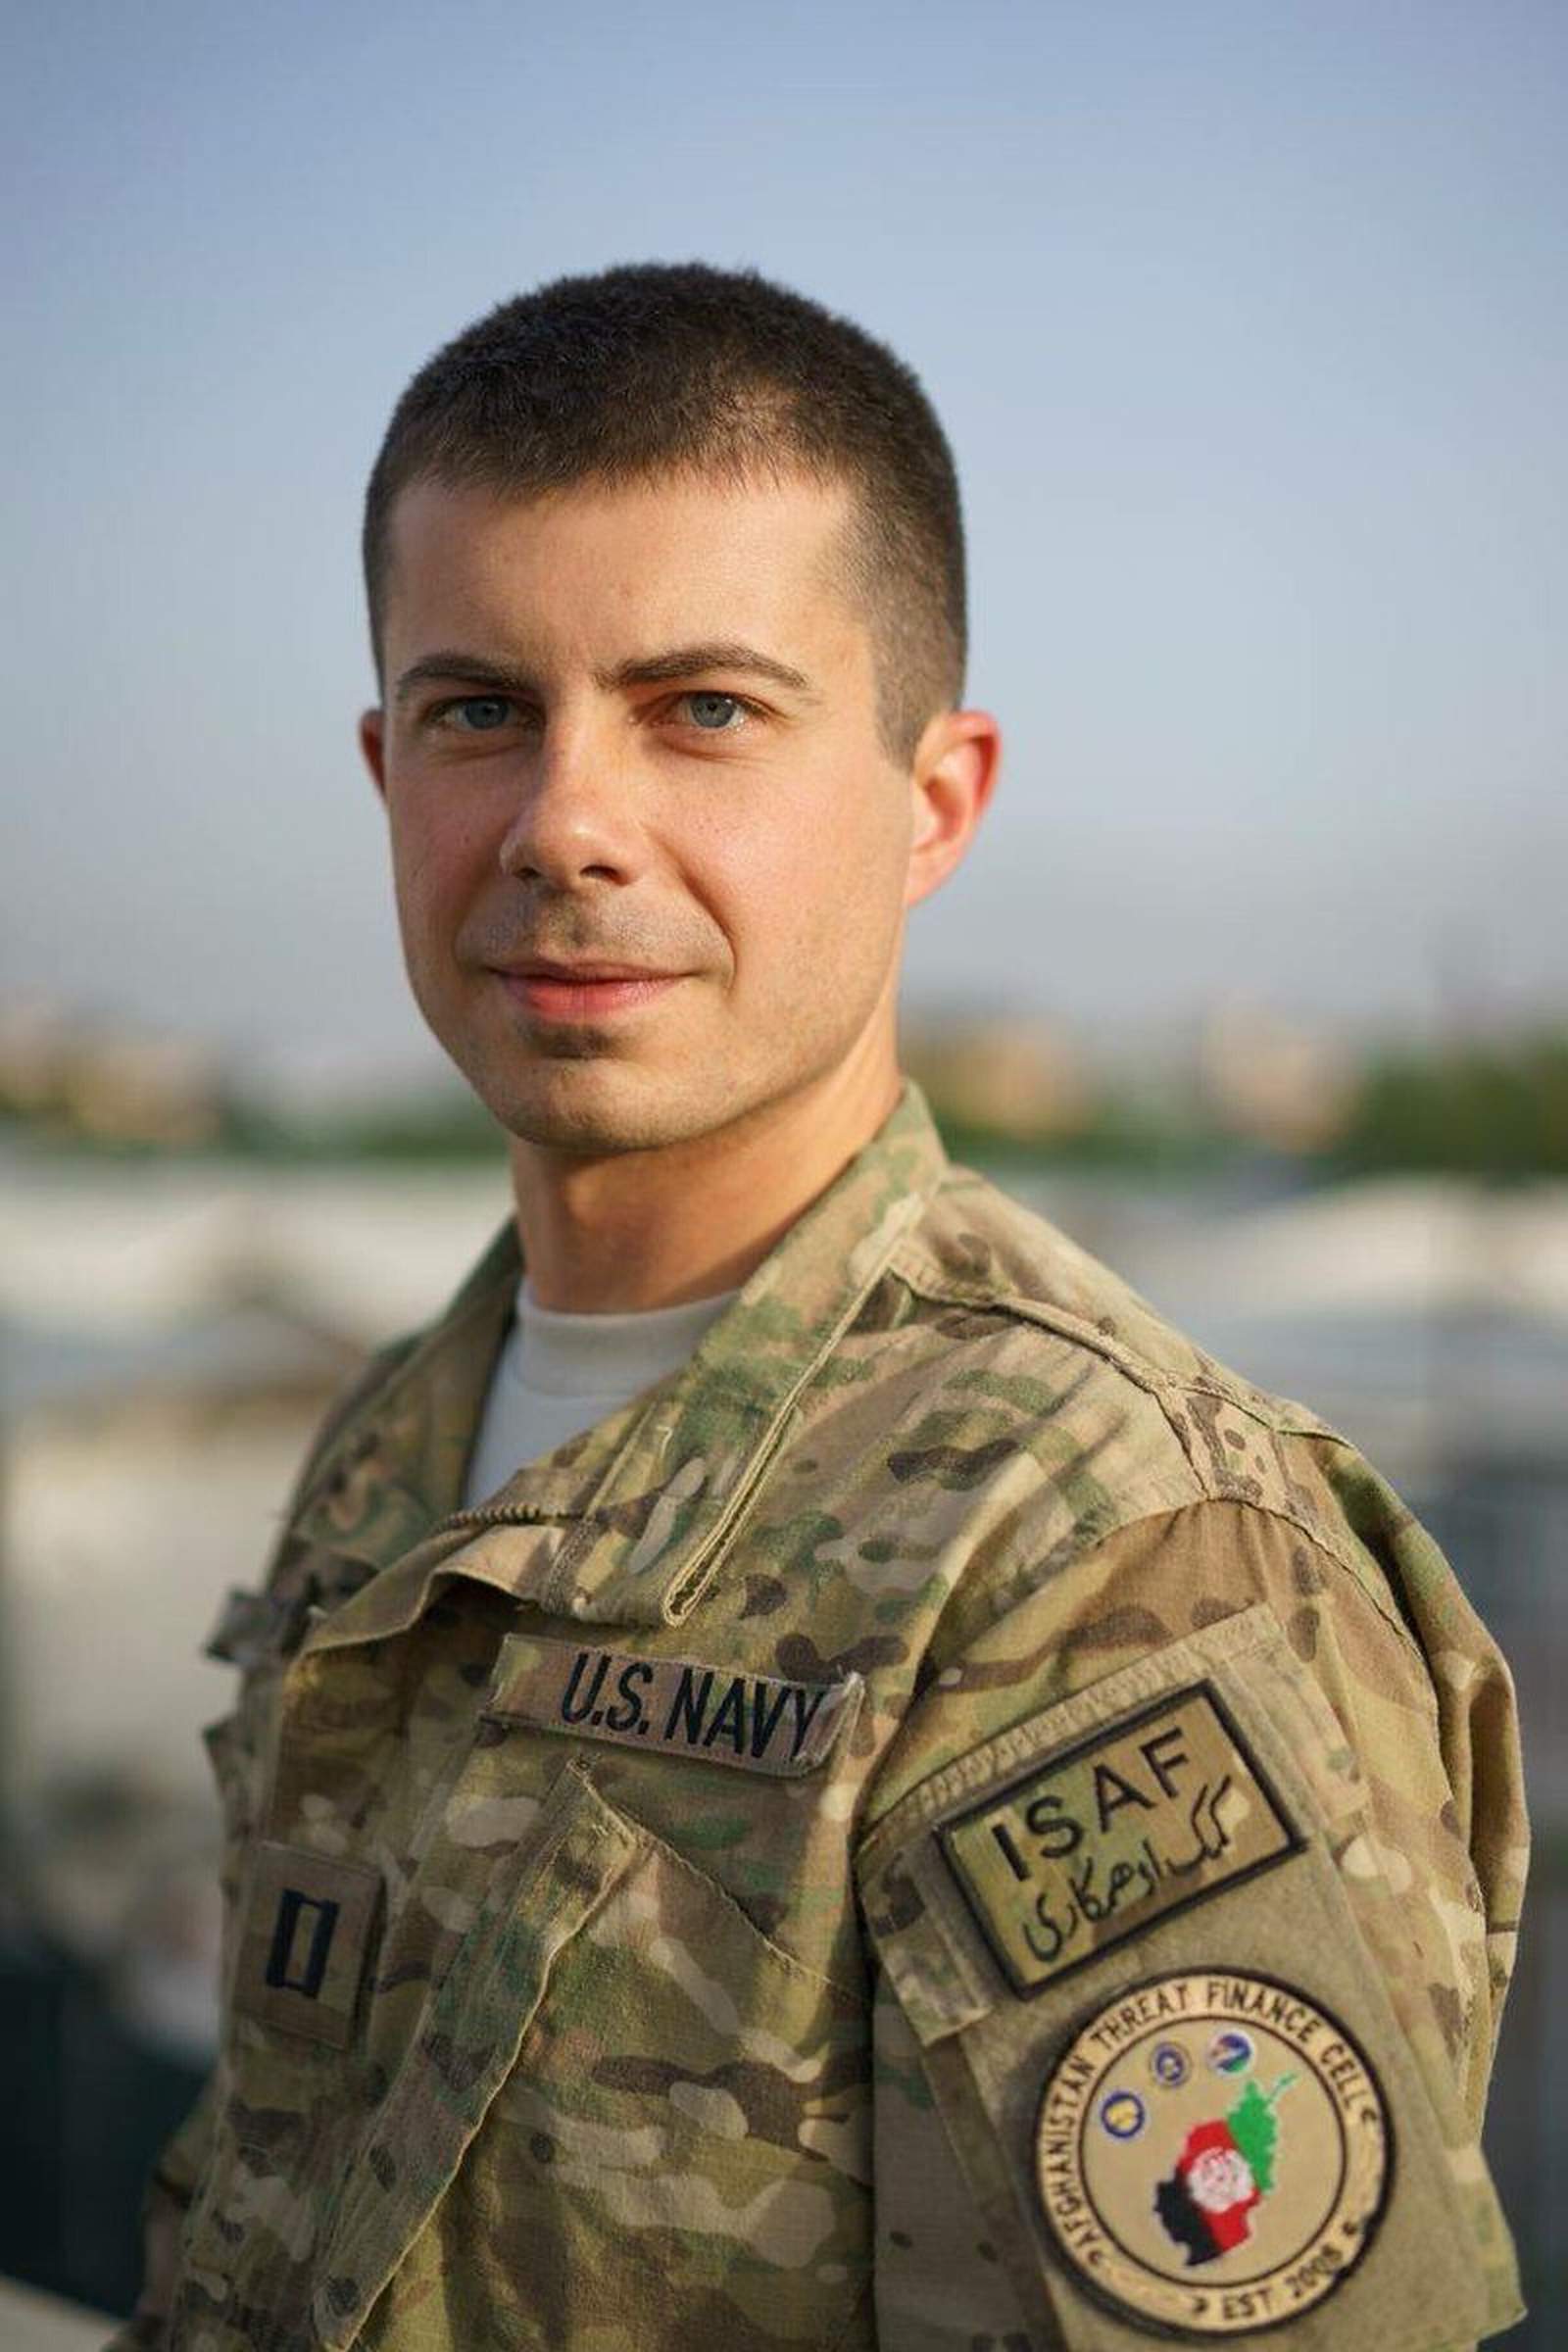 Buttigieg touts military service, wary of overstating role